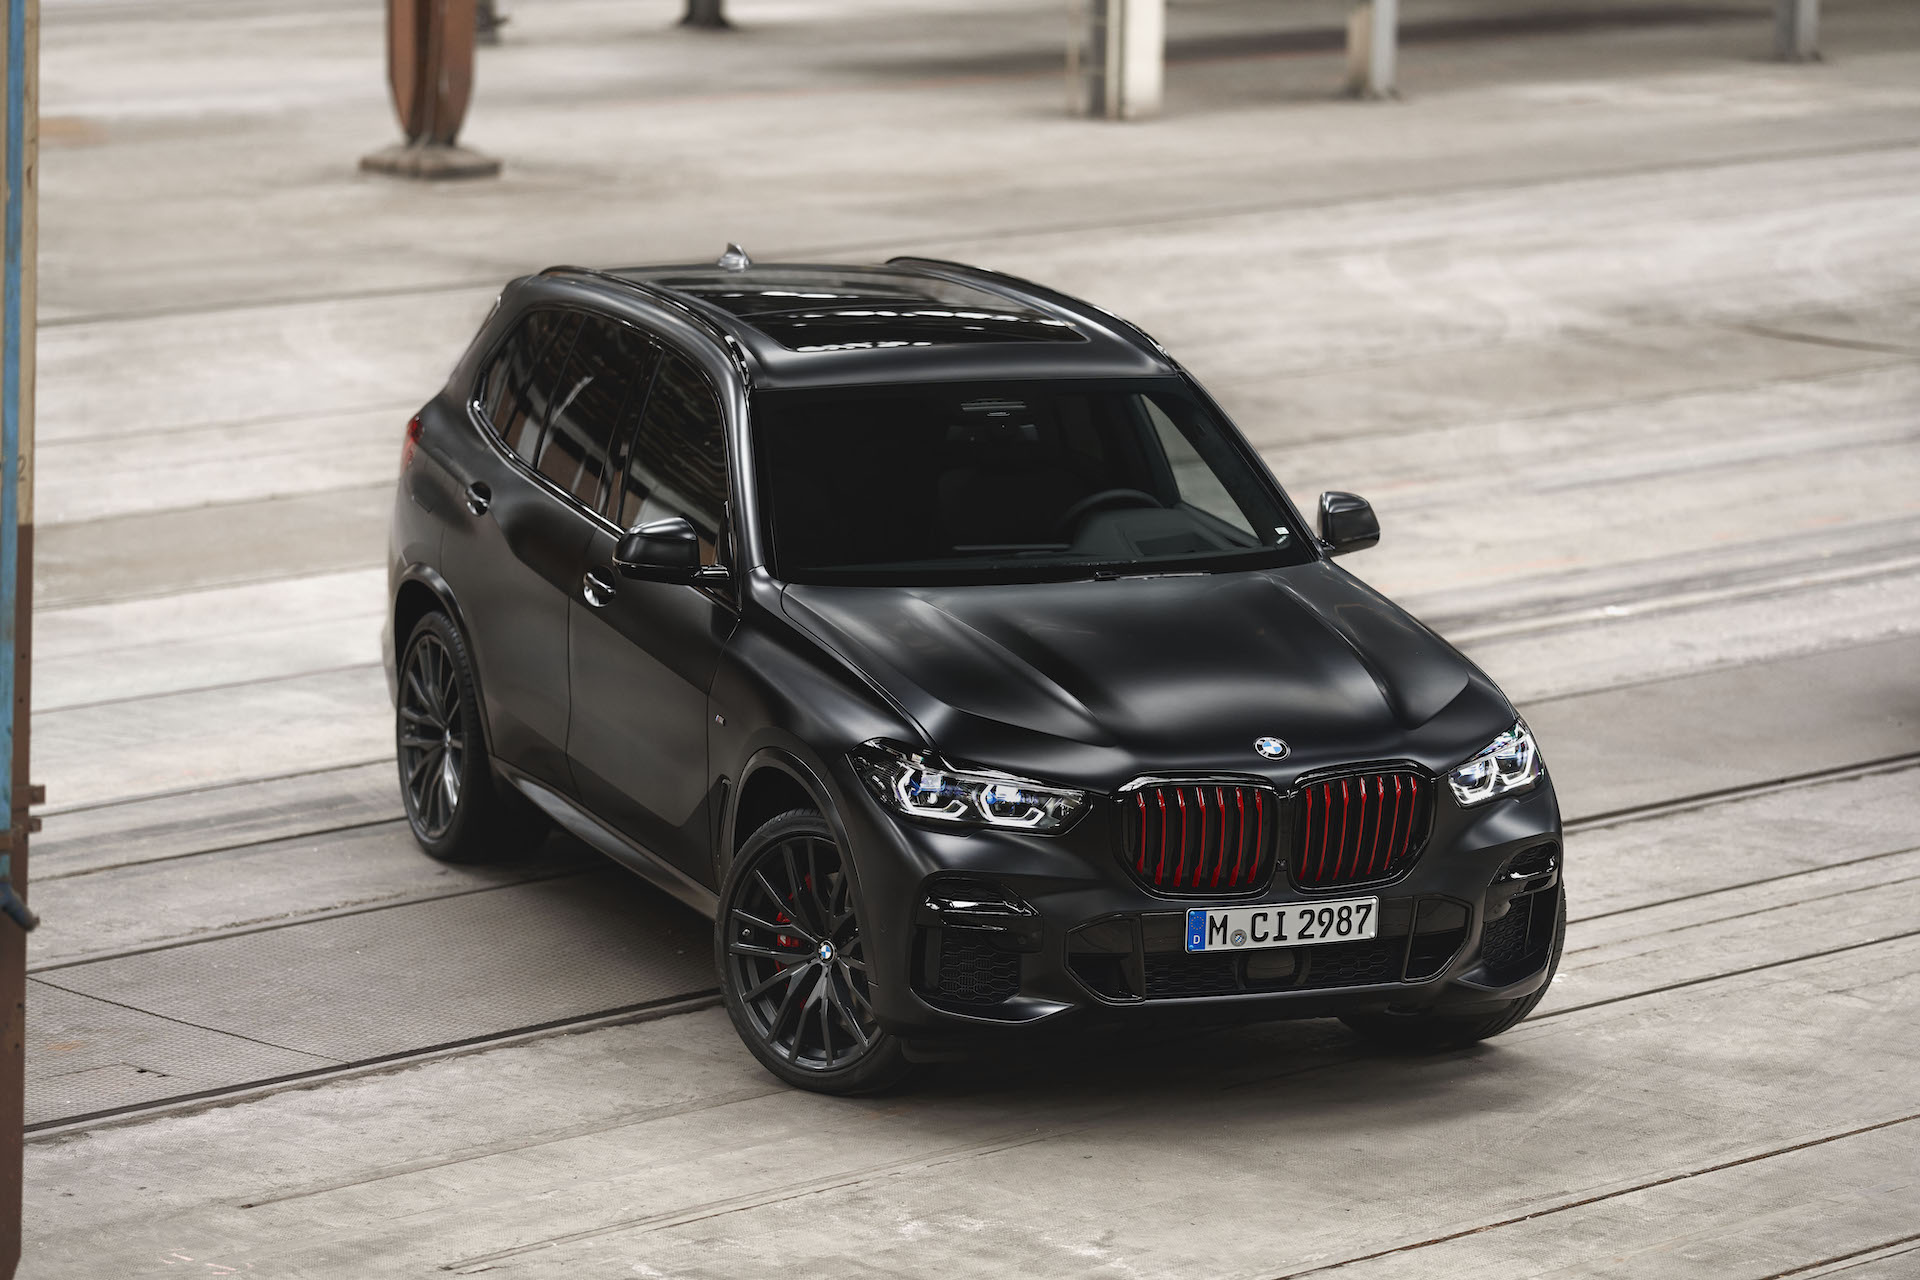 2022 BMW X5 Black Vermilion is perfect for the fashion conscious